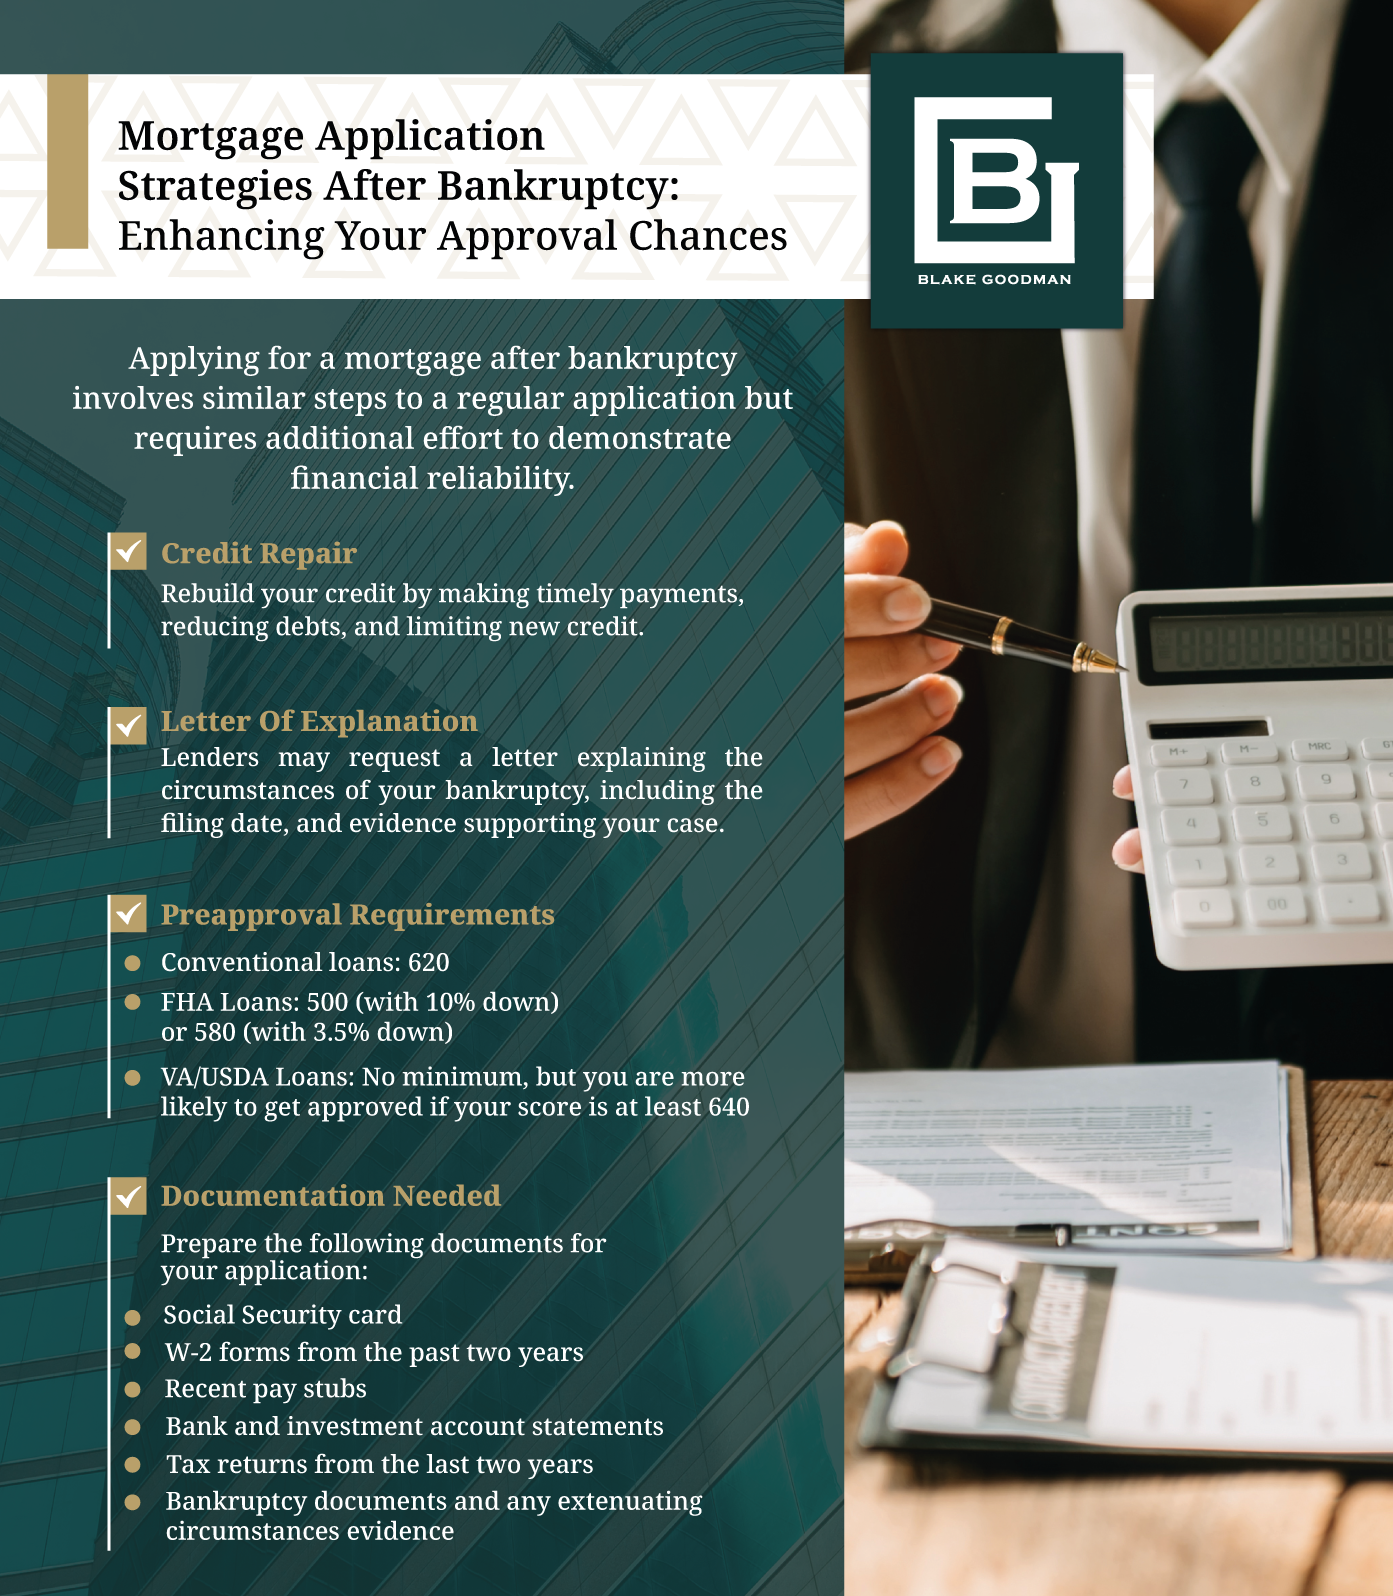 An infographic that explains the mortage application strategies after bankruptcy